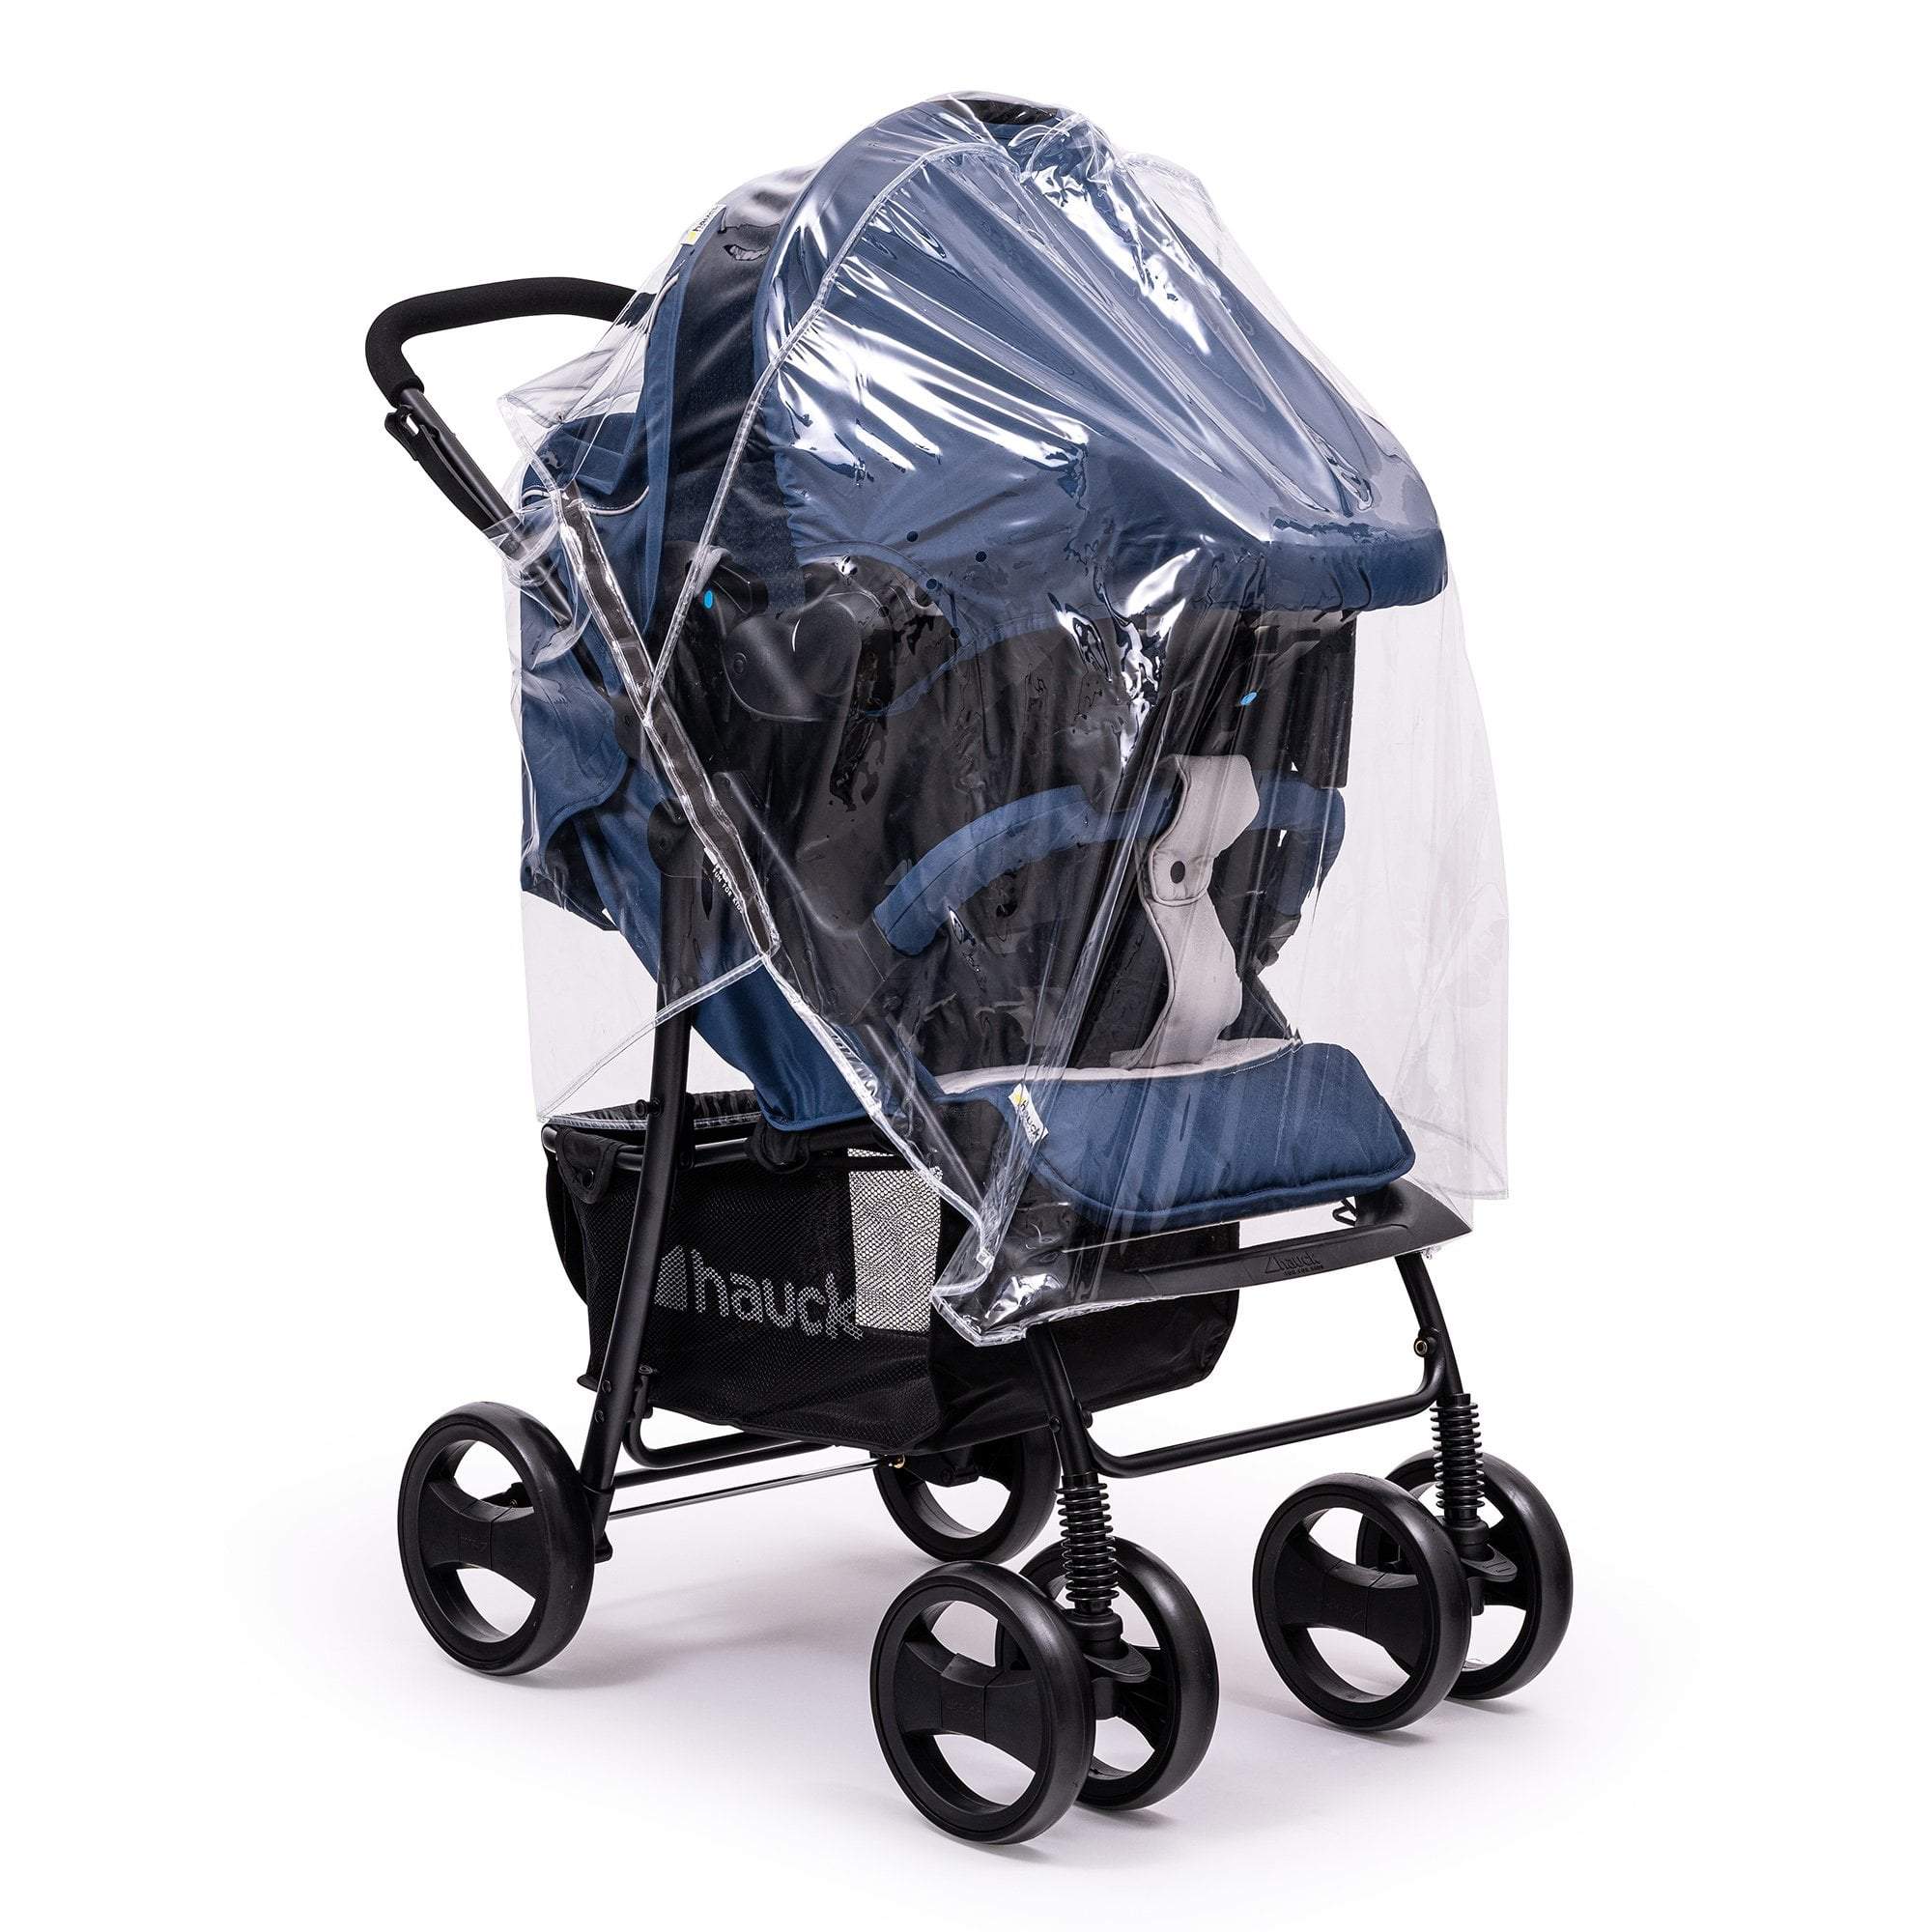 Travel System Raincover Compatible with Petite Star - Fits All Models - For Your Little One